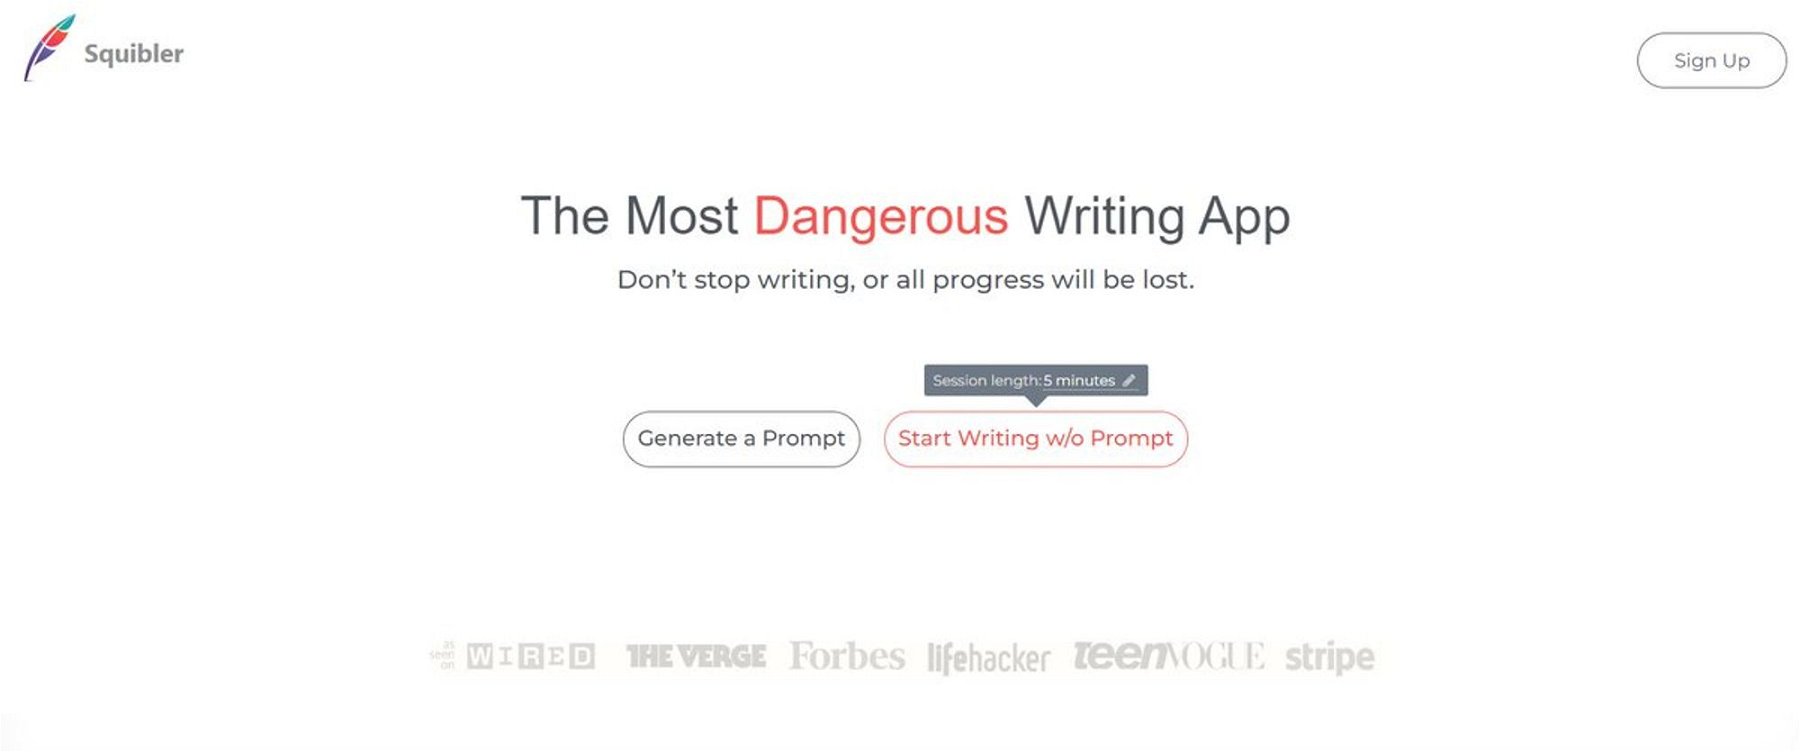 The Most Dangerous Writing App displays its homepage.